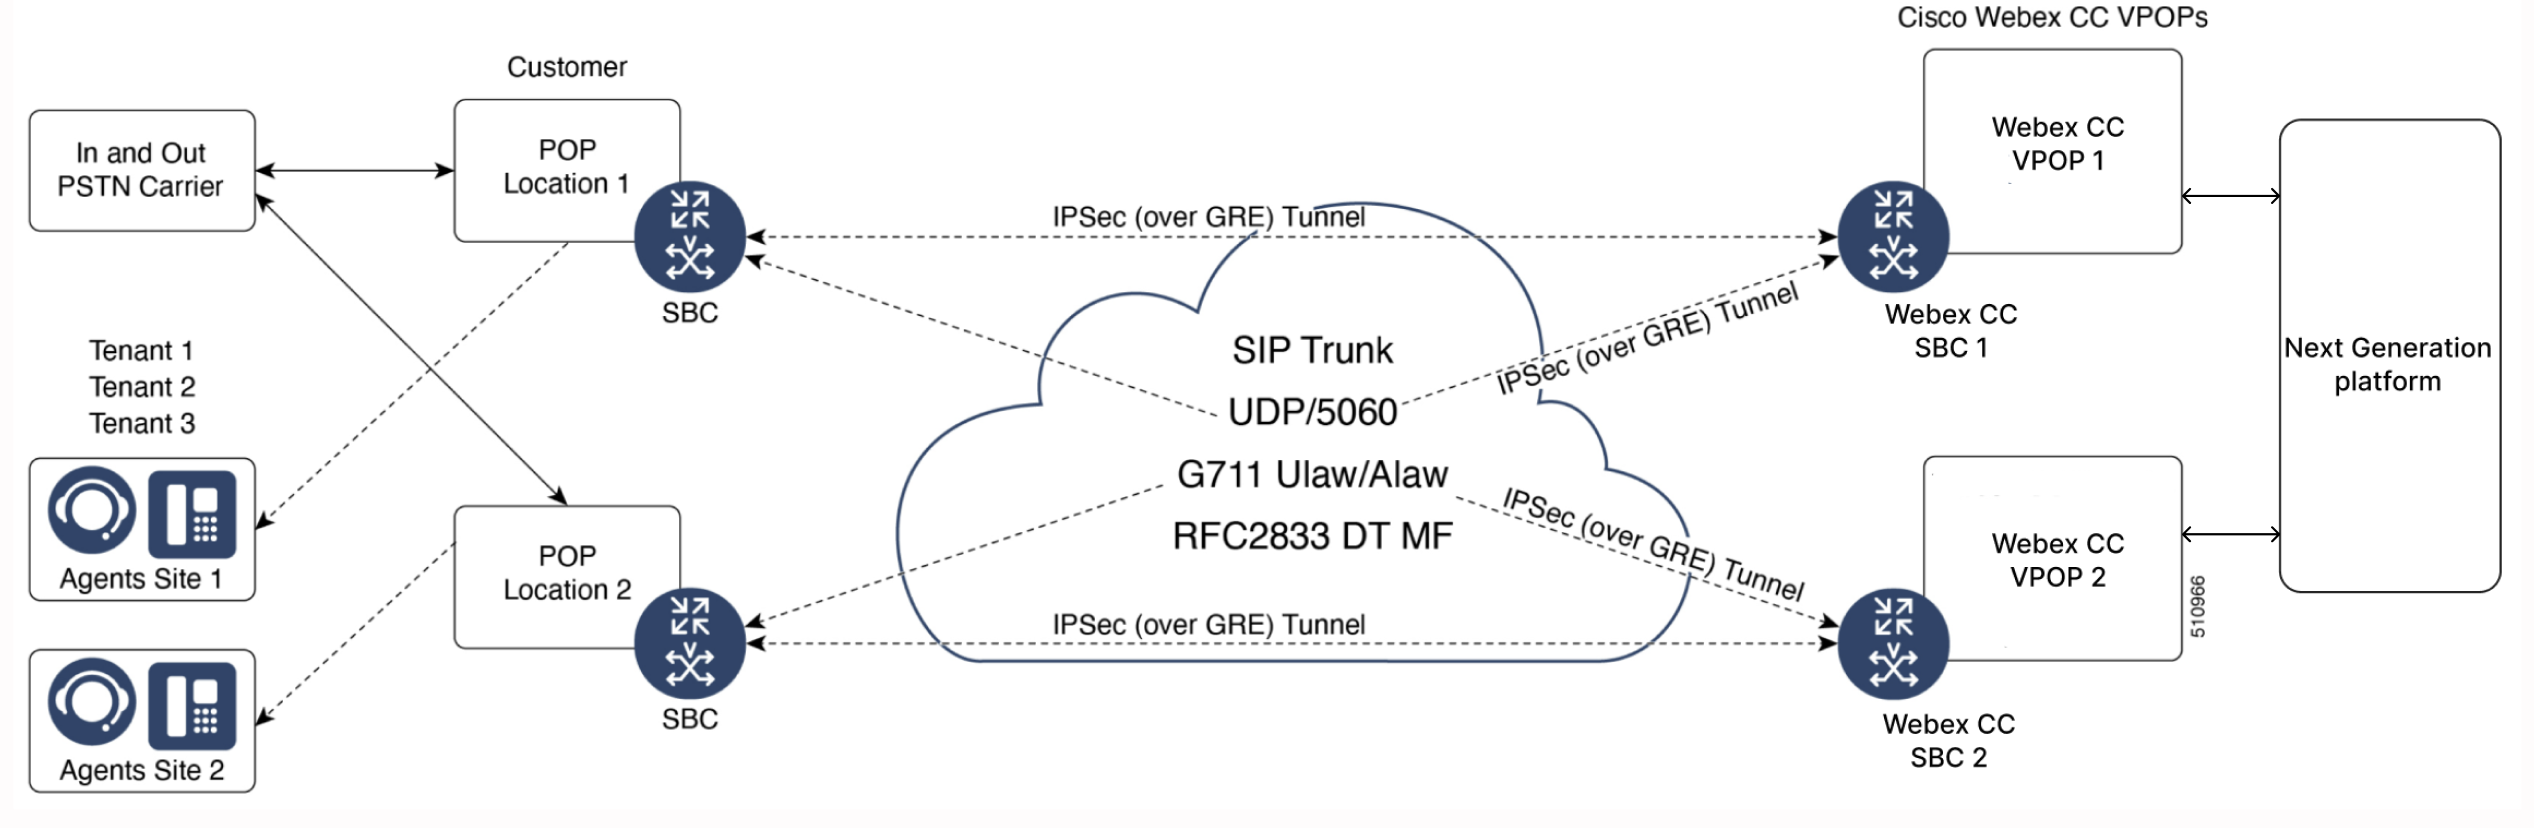 Typical IPsec or IPSec over GRE Tunnel.